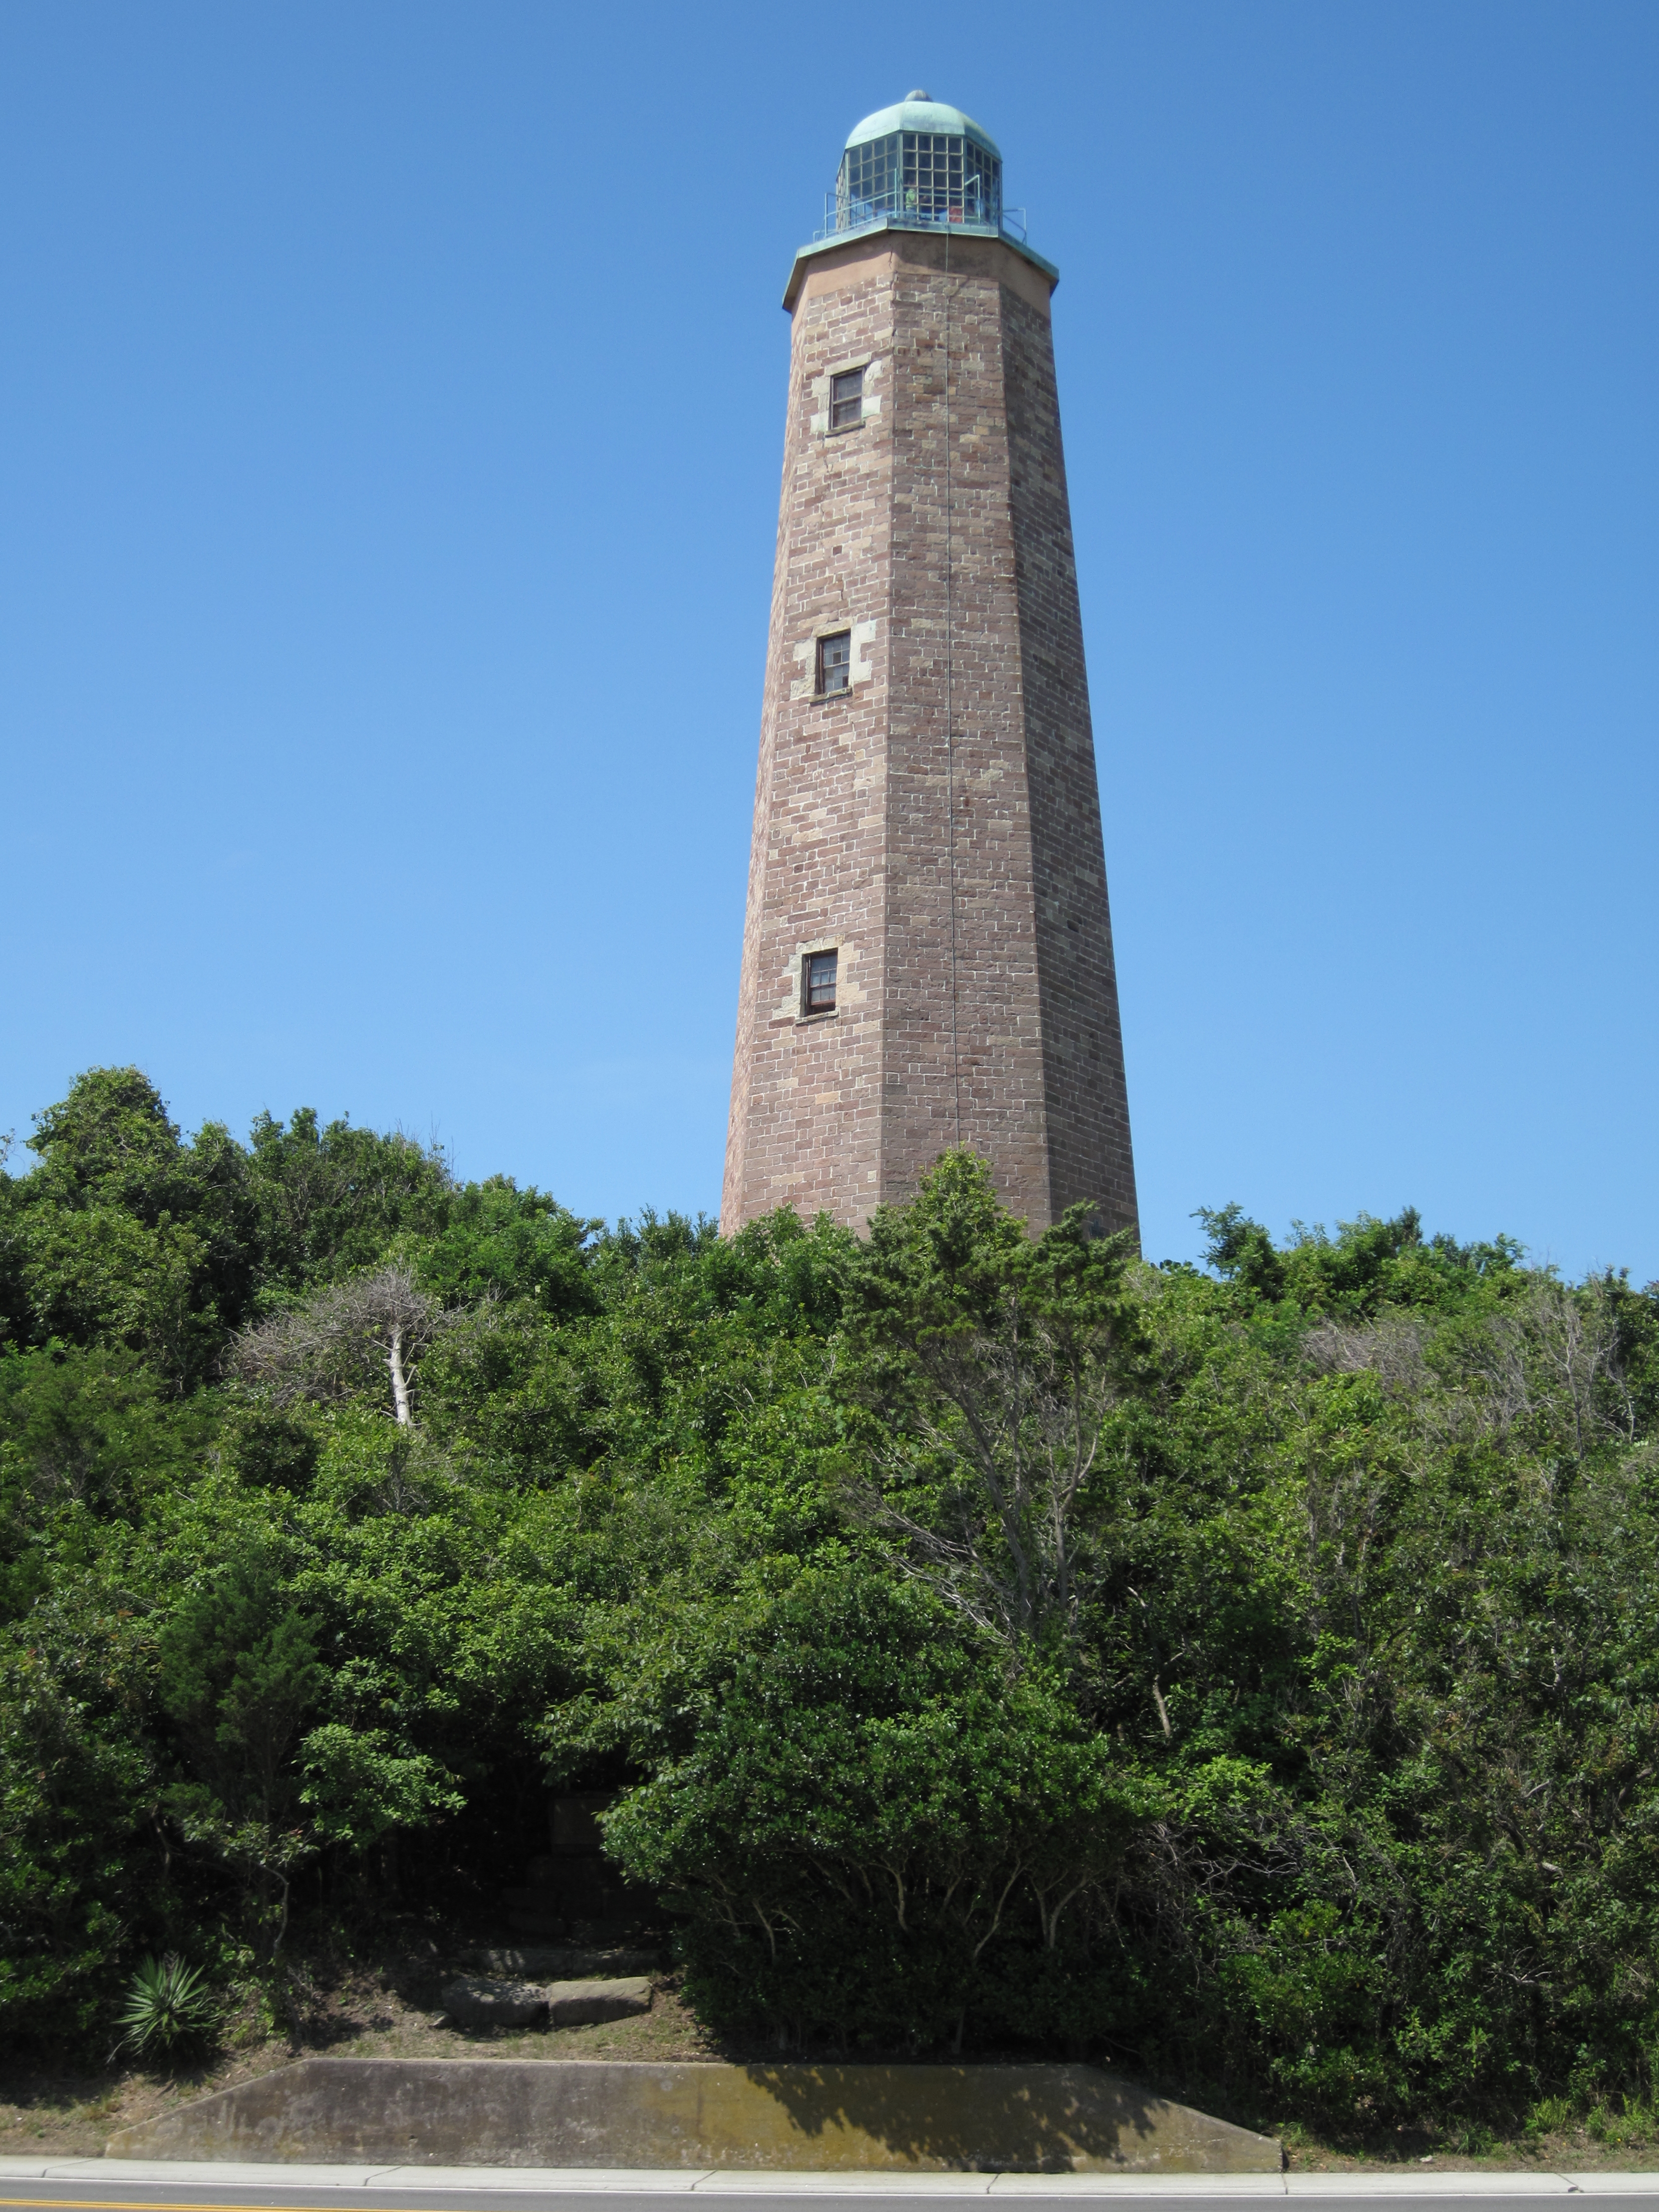 The Old Cape Henry lighthouse